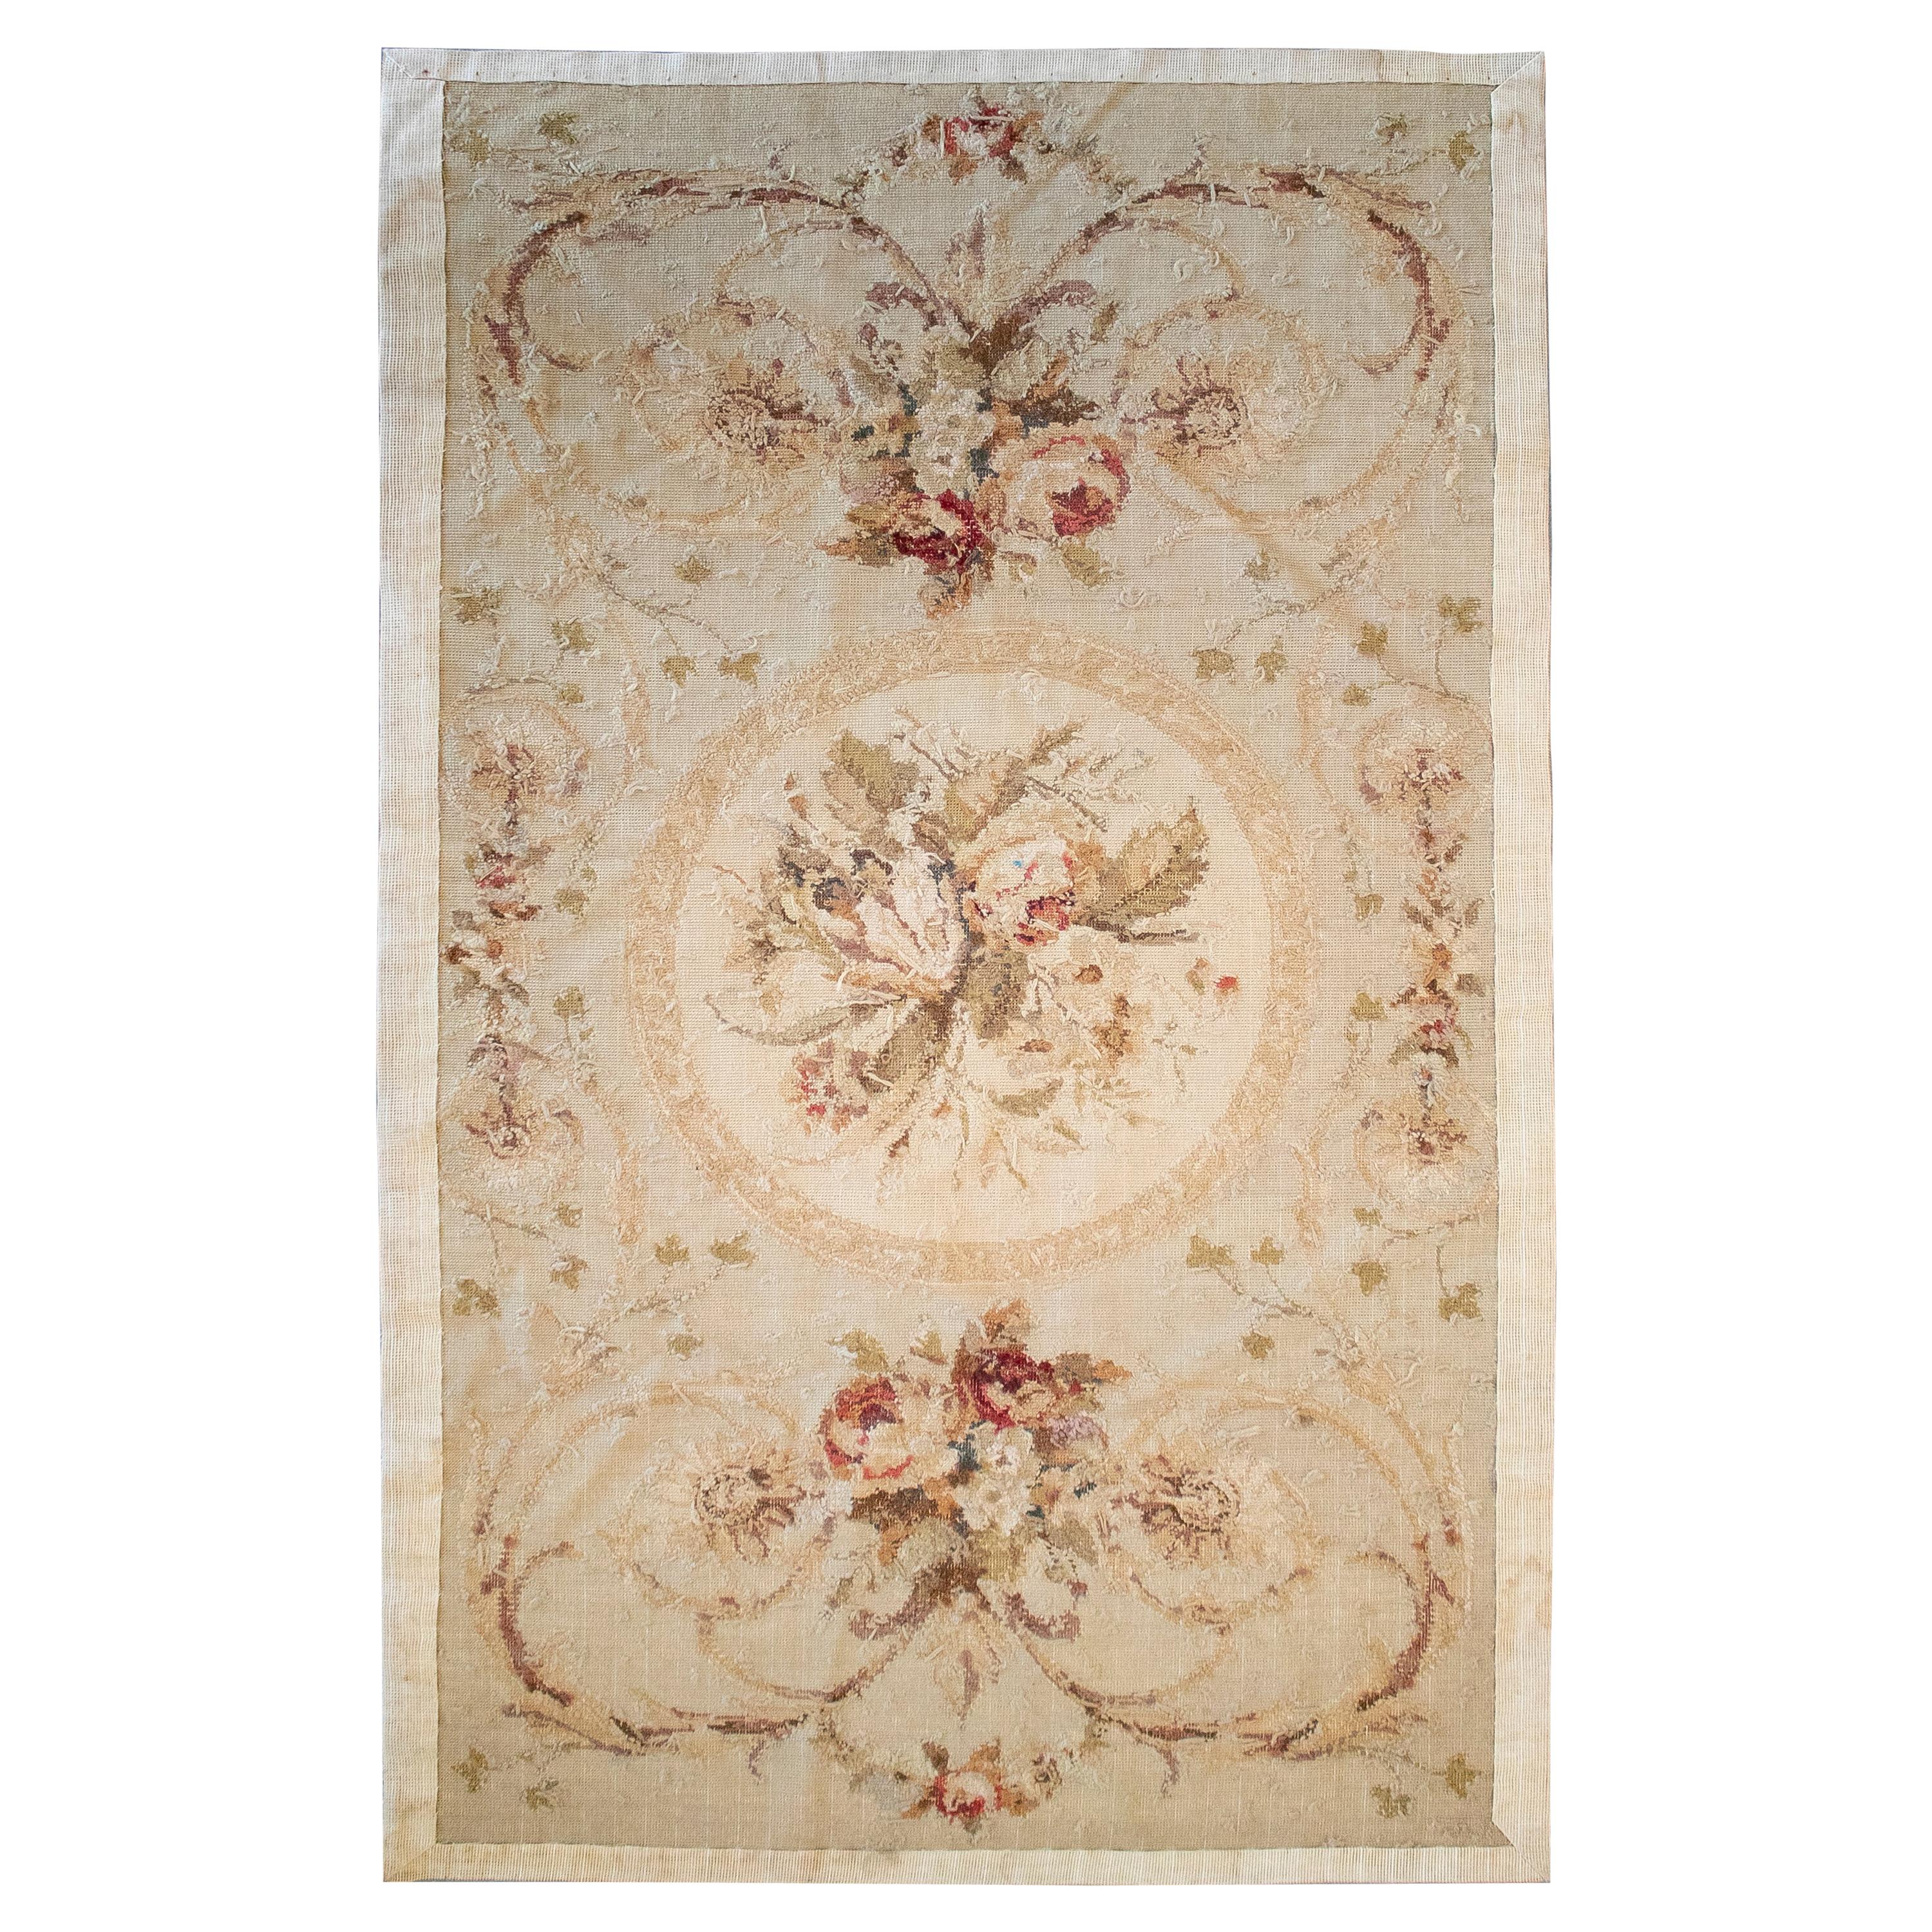 1950s French Carpet with Ochre Tones and Flower Decorations